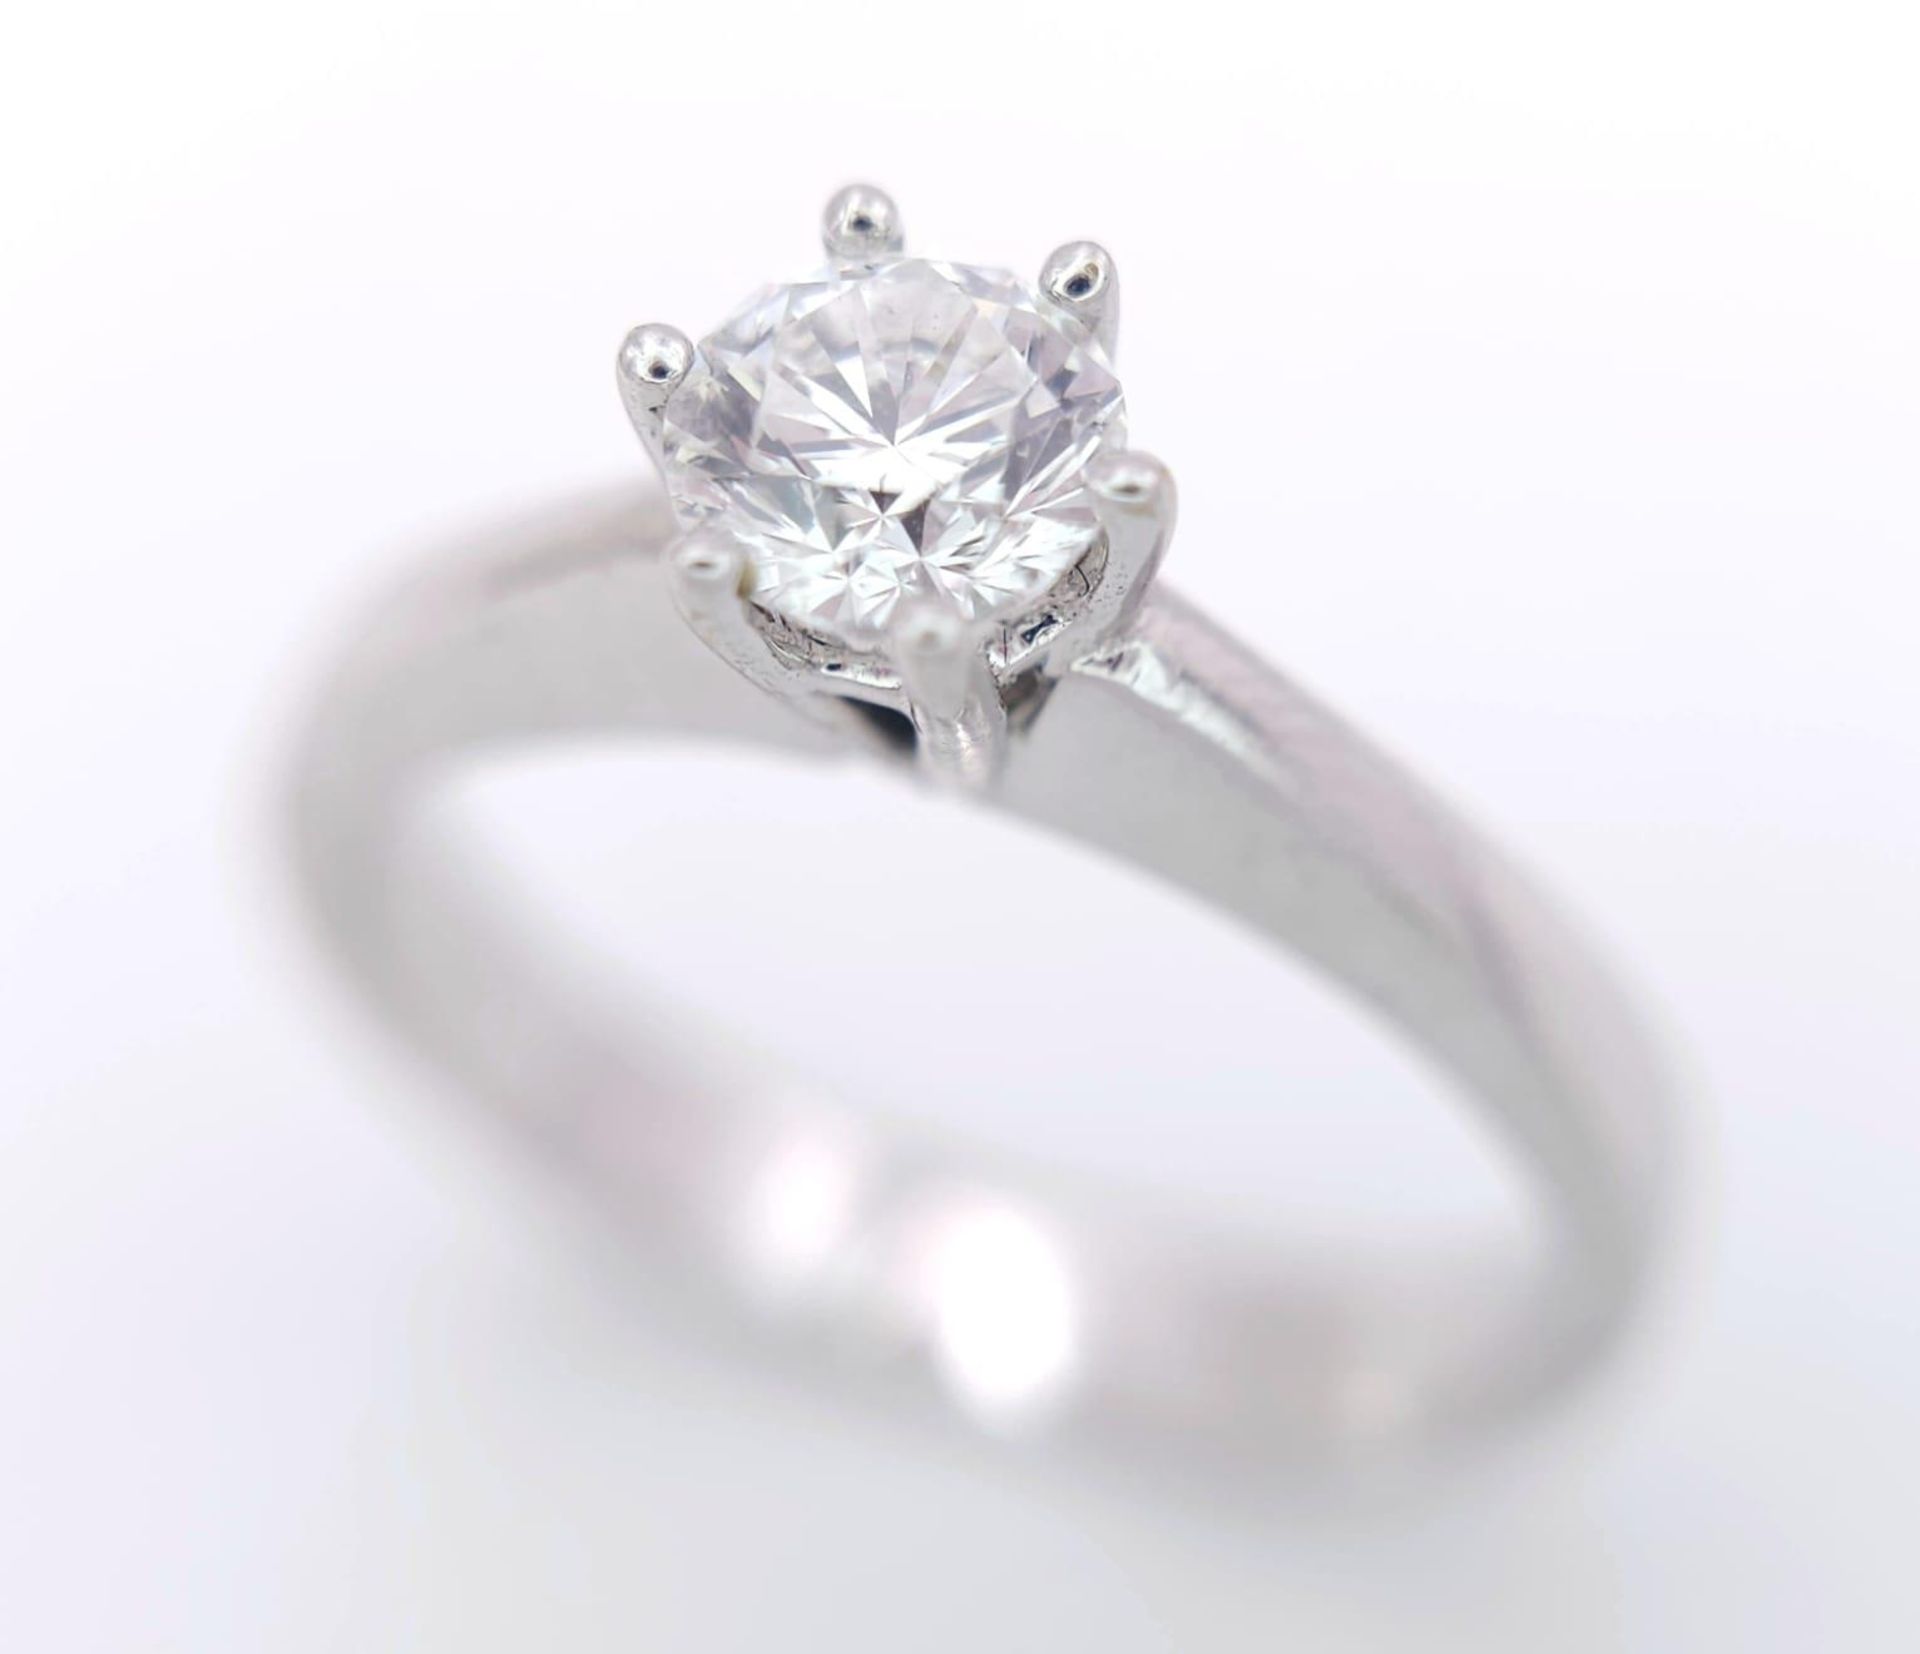 AN 18K WHITE GOLD DIAMOND SOLITAIRE RING - 0.50CT. 6 CLAW SETTING. 3.9G. SIZE N - Bild 2 aus 7